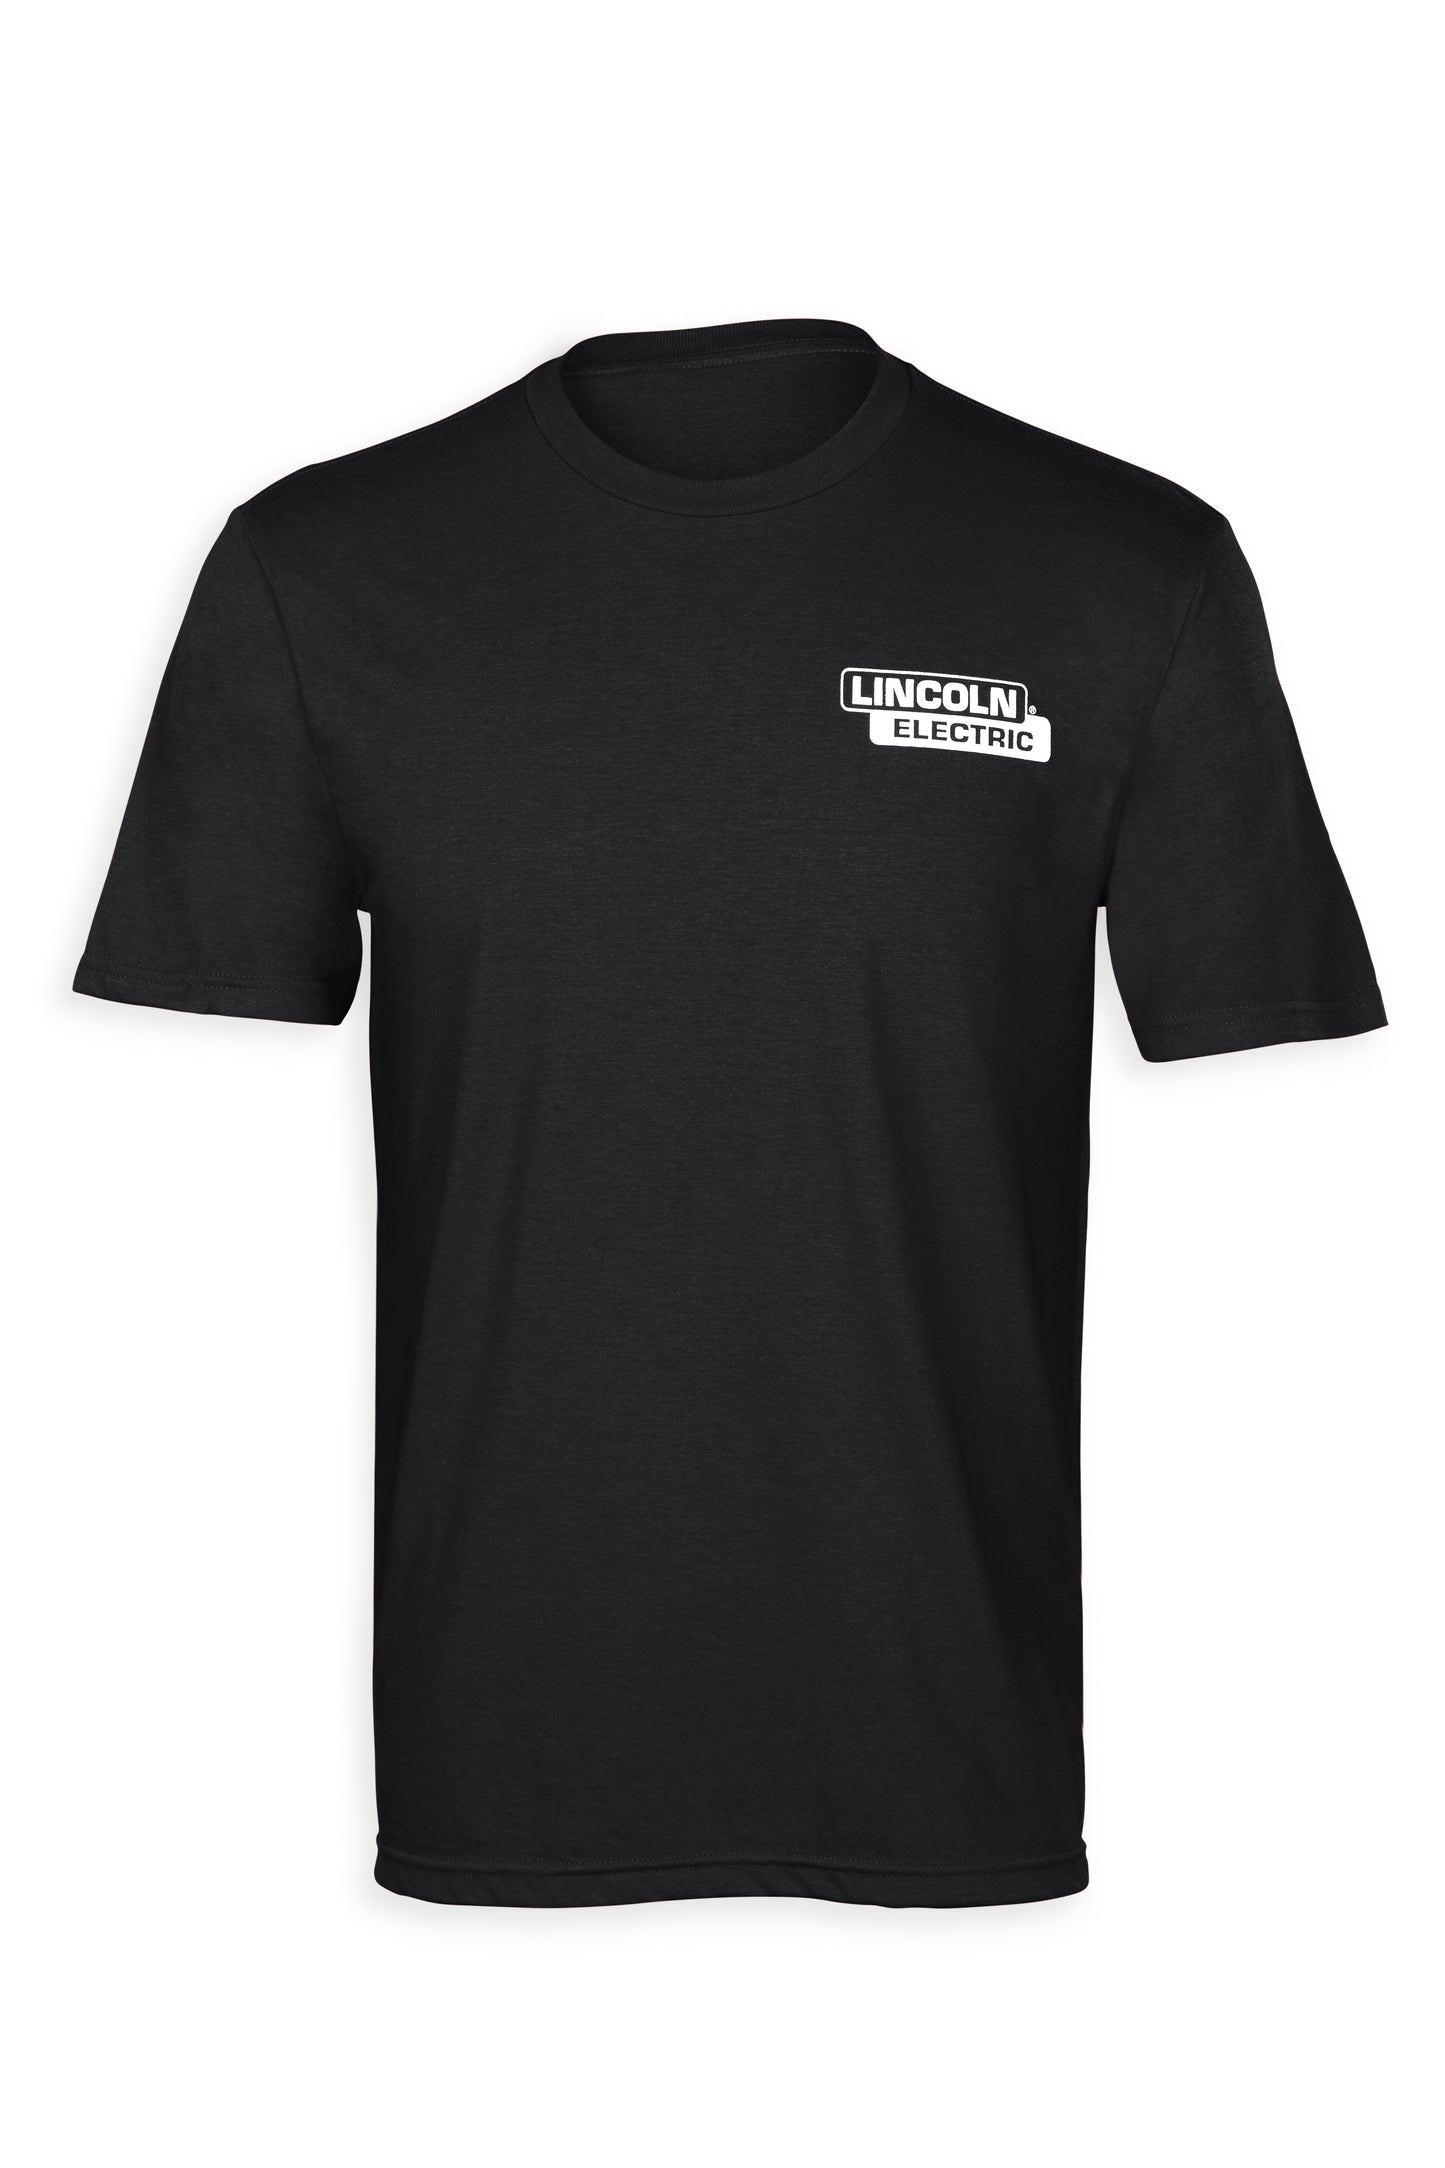 Lincoln Electric Flag T-Shirt - 2023 Limited Edition Tee